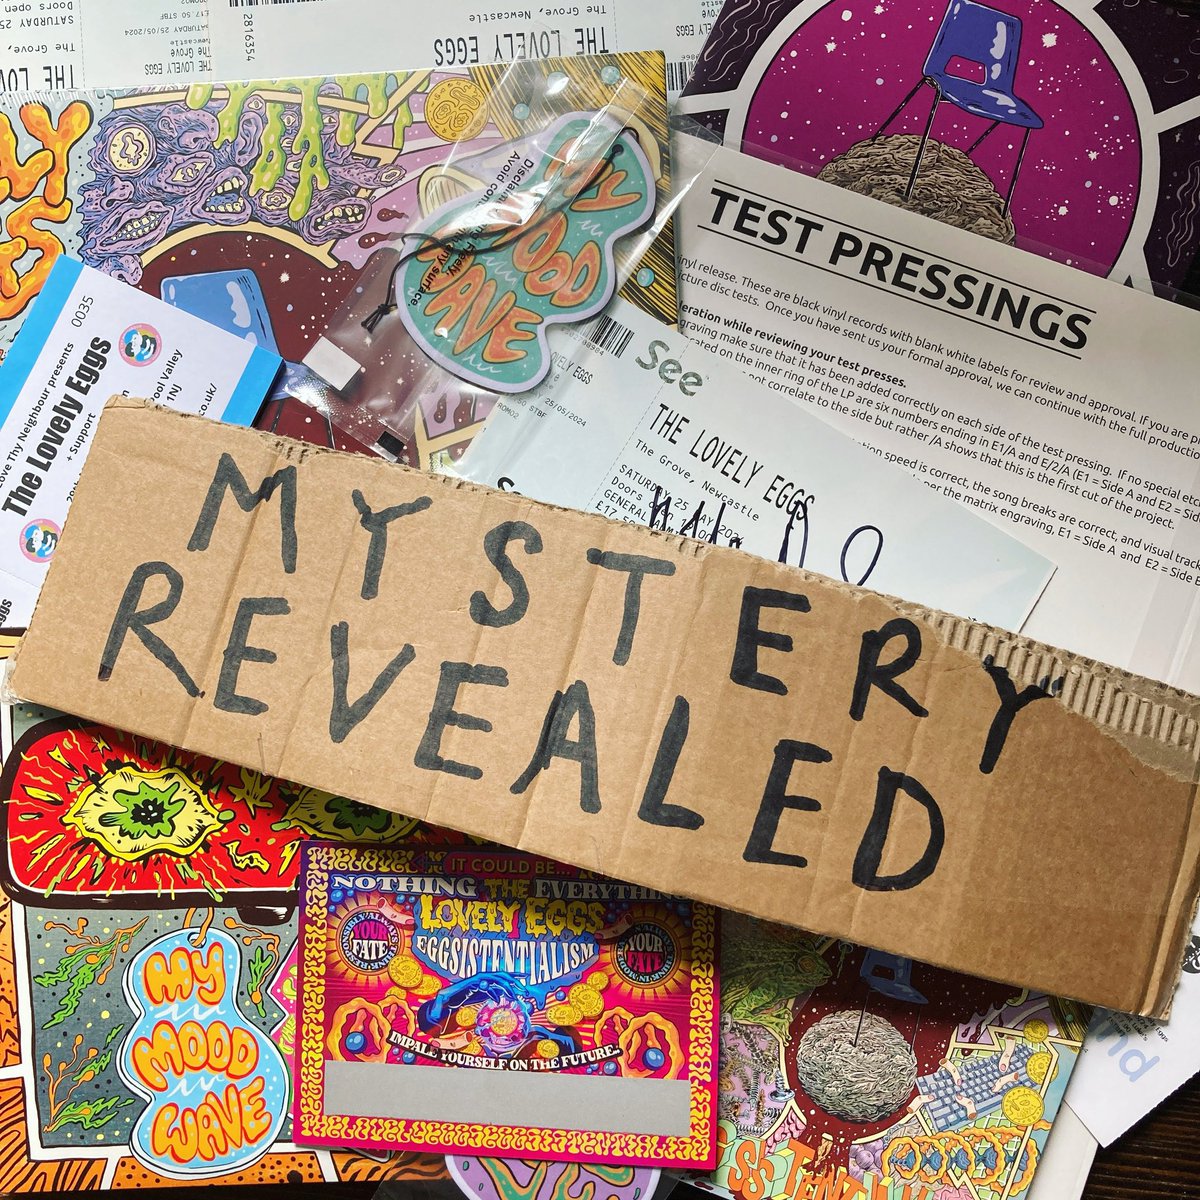 LAST CHANCE! The secret behind the Eggs Mystery scratch card will be revealed tomorrow at 11.30am on Instagram Live! 🔮 It’s not too late to win loads of free rare crap! Last post going out today. Be innit to fucking win it! 👊 thelovelyeggs.co.uk/pre-orders.php…